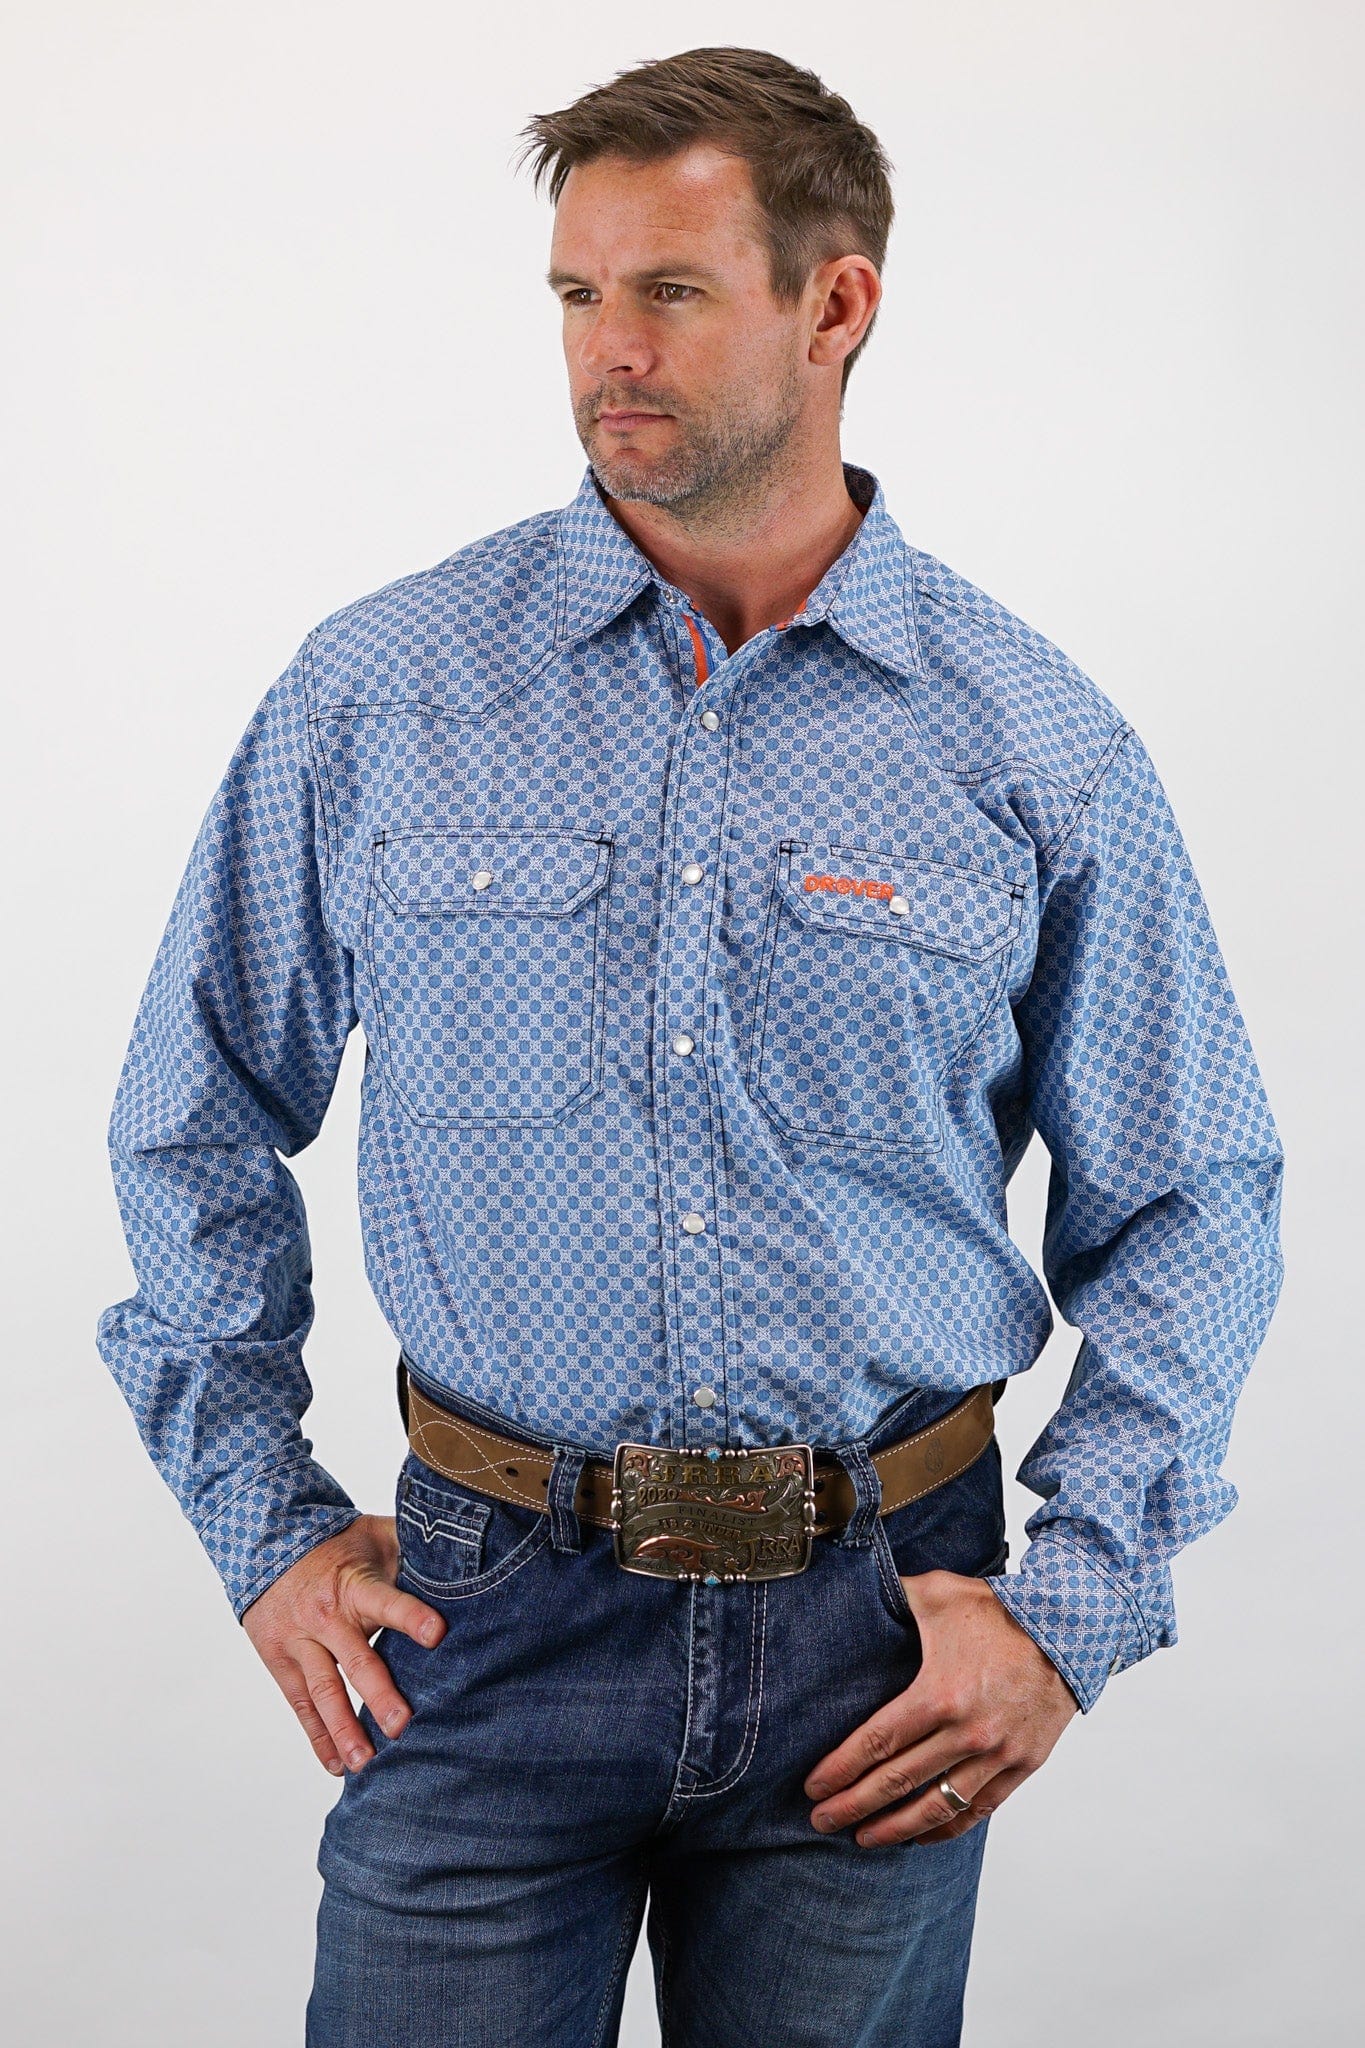 Drover Cowboy Threads Shirts Signature Series - Outlaw - Pearl Snap, Print, Option Cuff, Classic Fit Shirt (Blue Diamond)